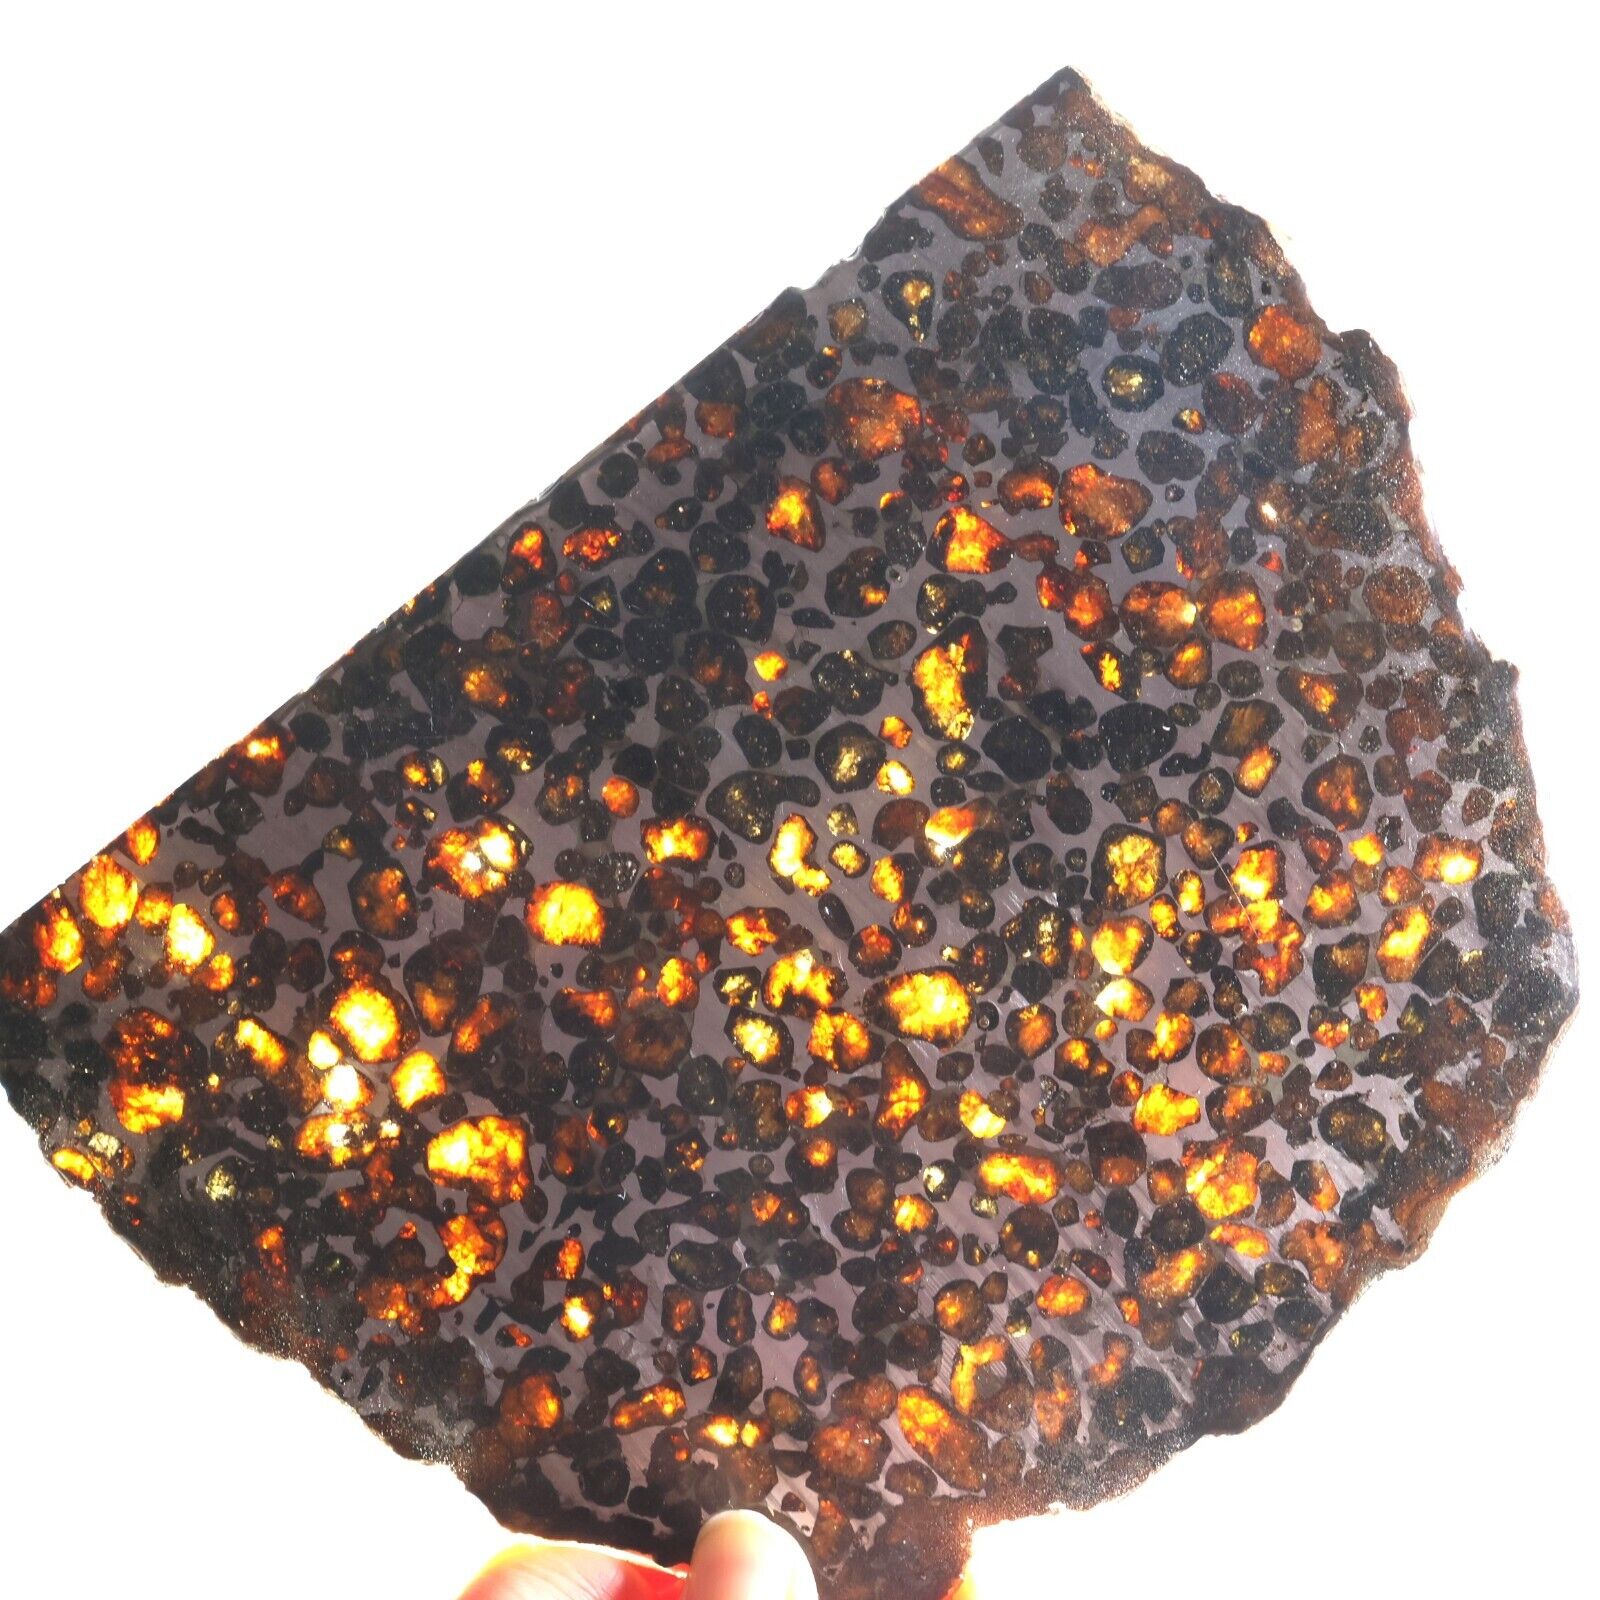 214g SERICHO Pallasite olive meteorite slice - from Kenya, Collection F216